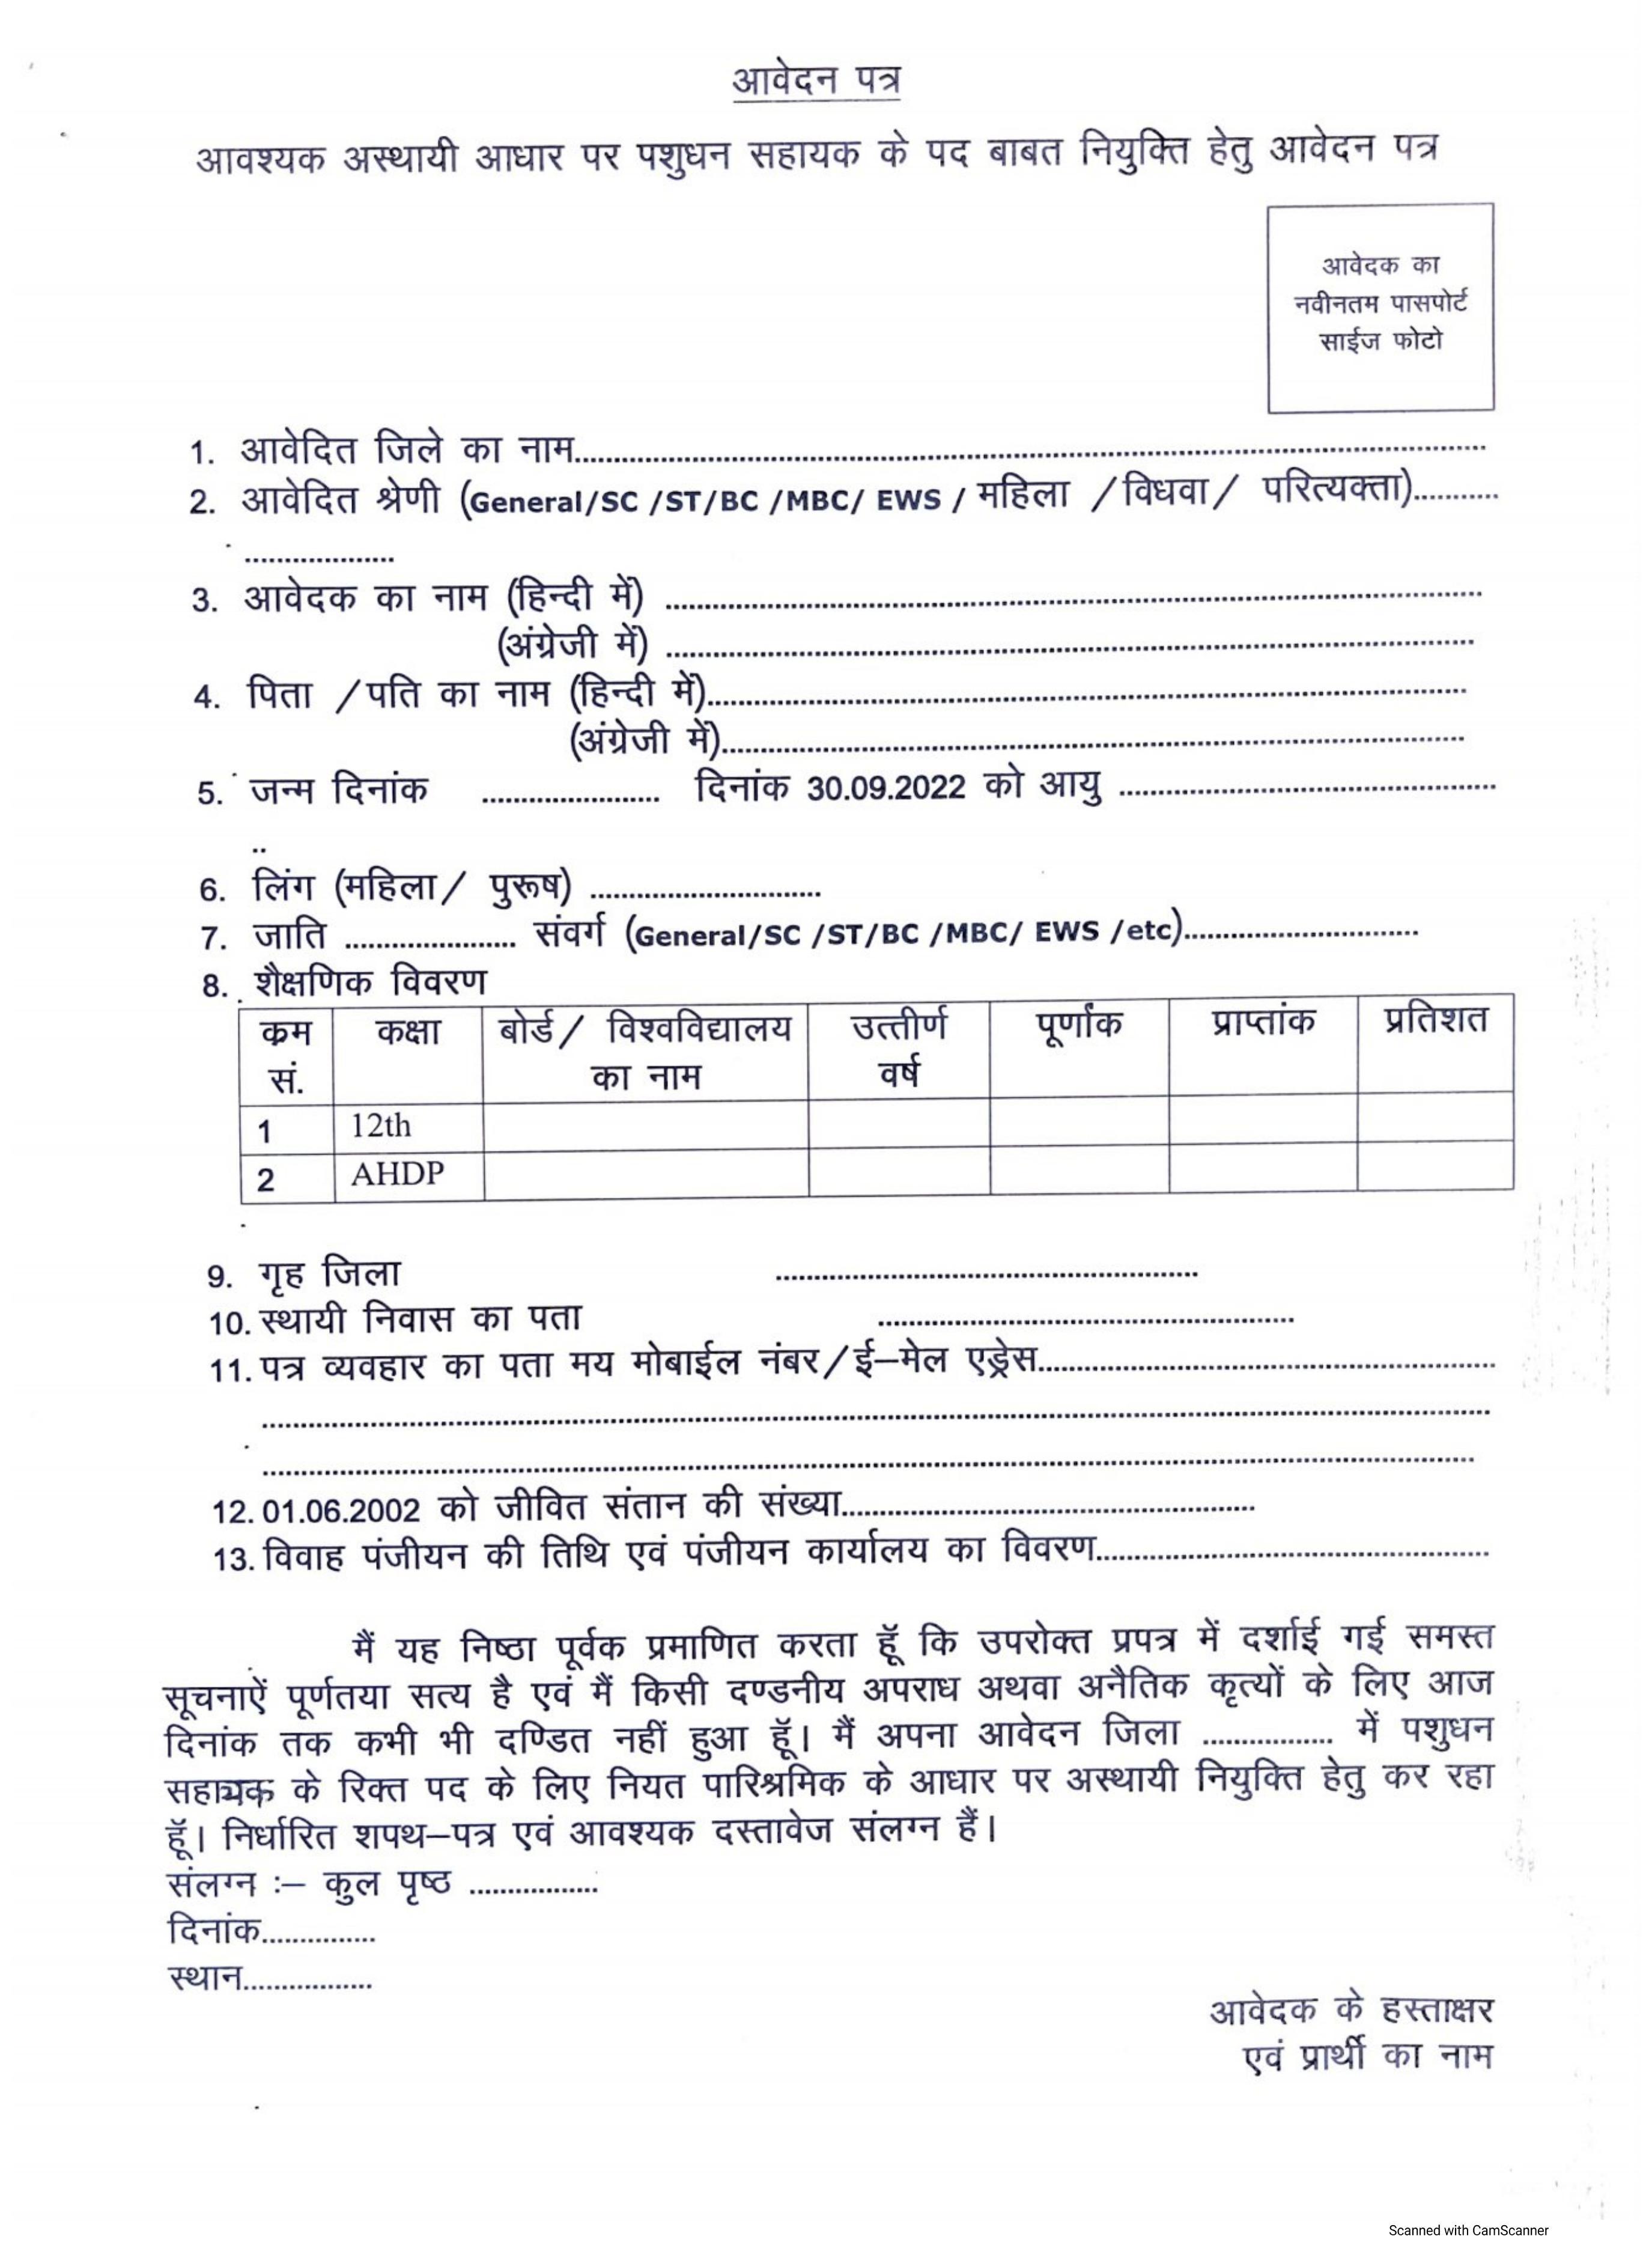 Department of Animal Husbandry Rajasthan 300 Livestock Assistant Recruitment 2022 - Page 2